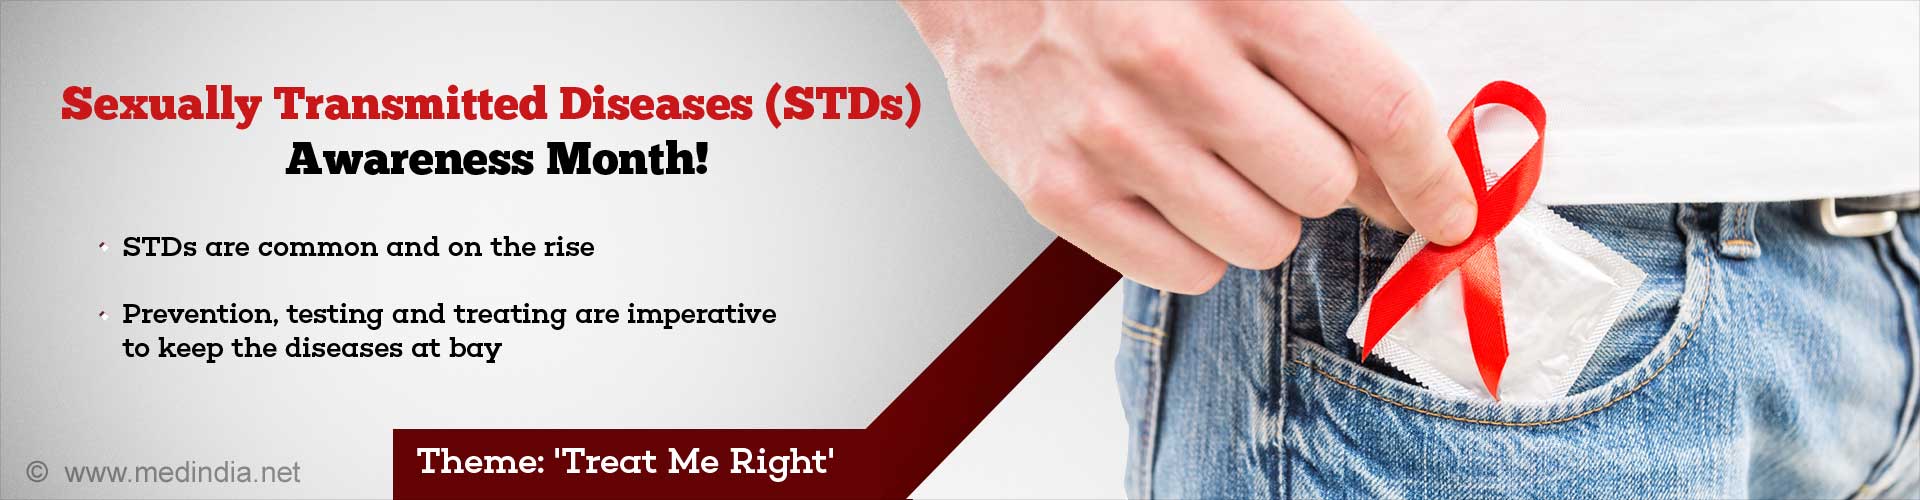 Sexually Transmitted Diseases (STDs) Awareness Month!
- STDs are common and on the rise
- Prevention, testing and treating are imperative to keep the diseases at bay
Theme: Treat me Right